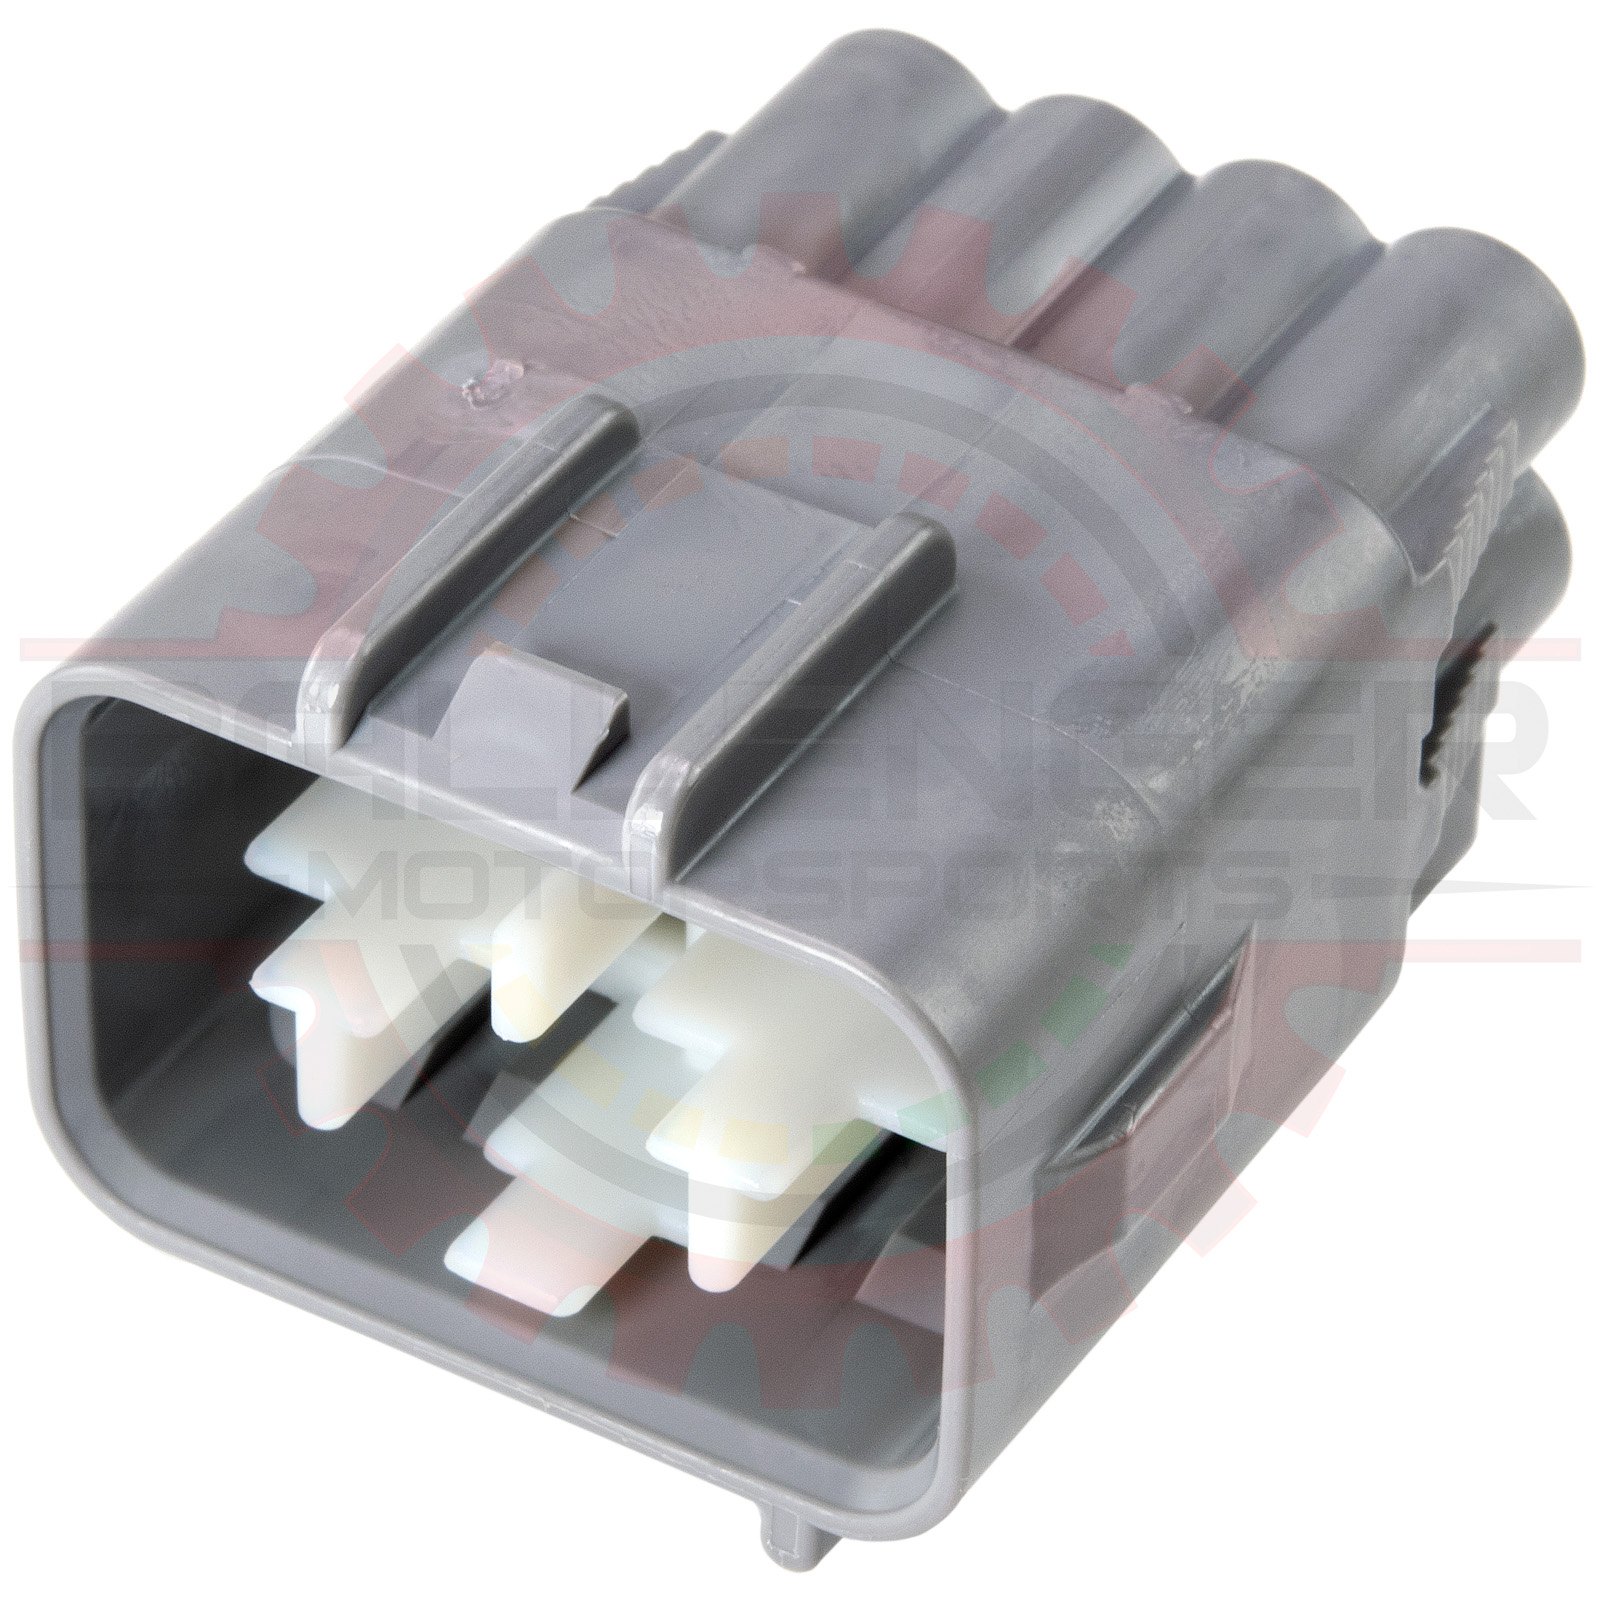 8 Way Japanese Connector Plug for Toyota Headlight Applications # 90980-10897